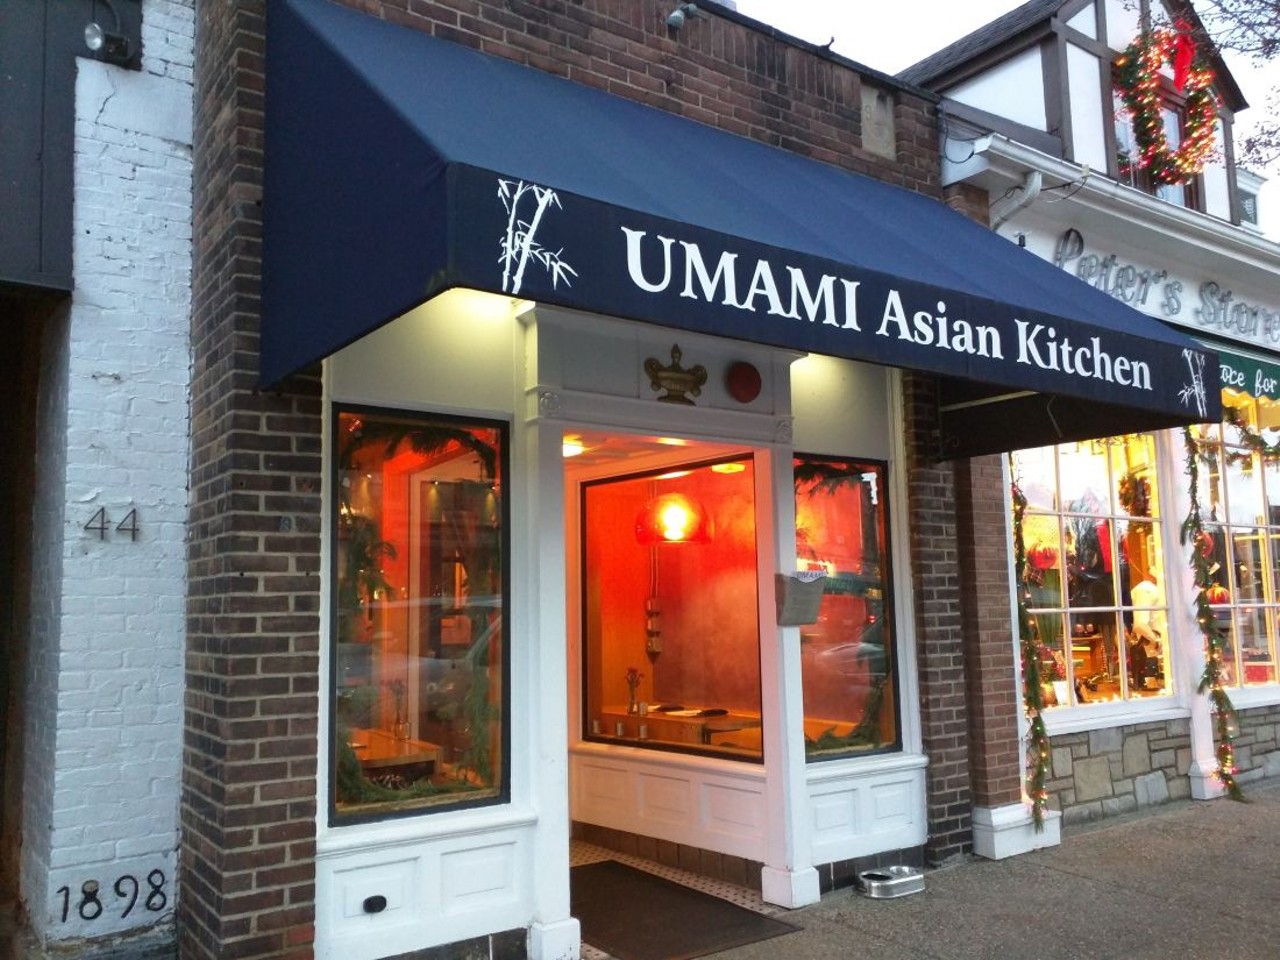  Umami
42 North Main St., Chagrin Falls
A decade ago we stumbled into an impossibly small bistro in Chagrin Falls, where we were blown away by the progressive Pan-Asian fare emanating from the equally small kitchen. True to its billing, Umami trafficked in foods redolent of racy flavors like tamari, dashi, ponzu, ginger and galangal. Back then, the swank but conservative village was awash in burgers, meatballs, steaks and ribs, and dishes such as seared albacore with ponzu sauce, coconut curry-spiked mussels and wasabi-crusted halibut proved a refreshing, even exciting, departure. The decade may have changed, but Umami thankfully has not.
Photo via Scene Archives